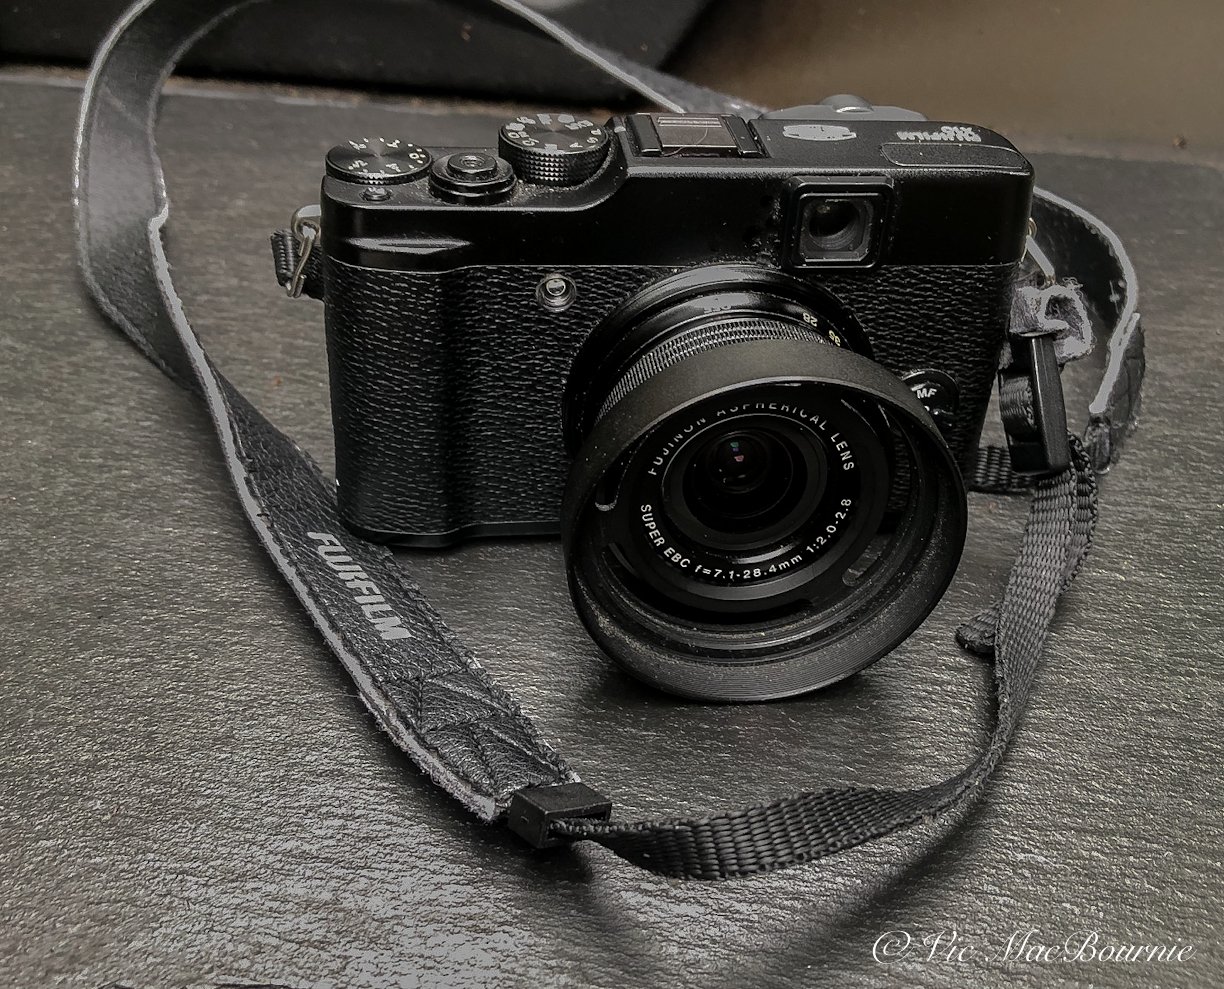 Ten year review: Fujifilm X10 is ideal camera for garden